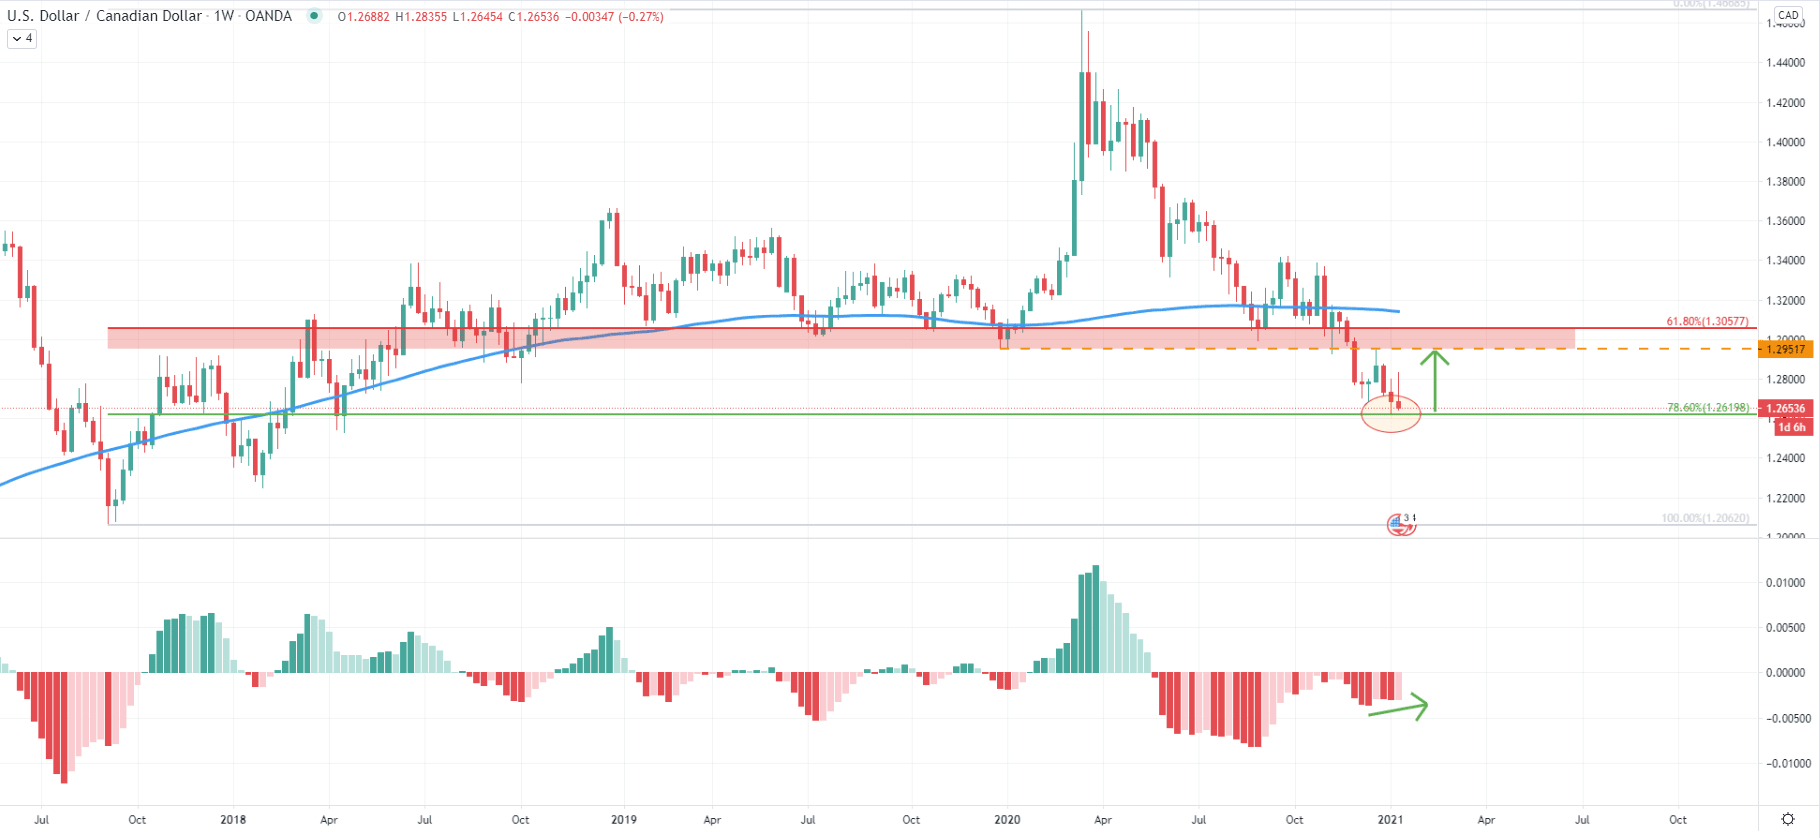 USD/CAD Weekly Technical Analysis 14 Jan 2021